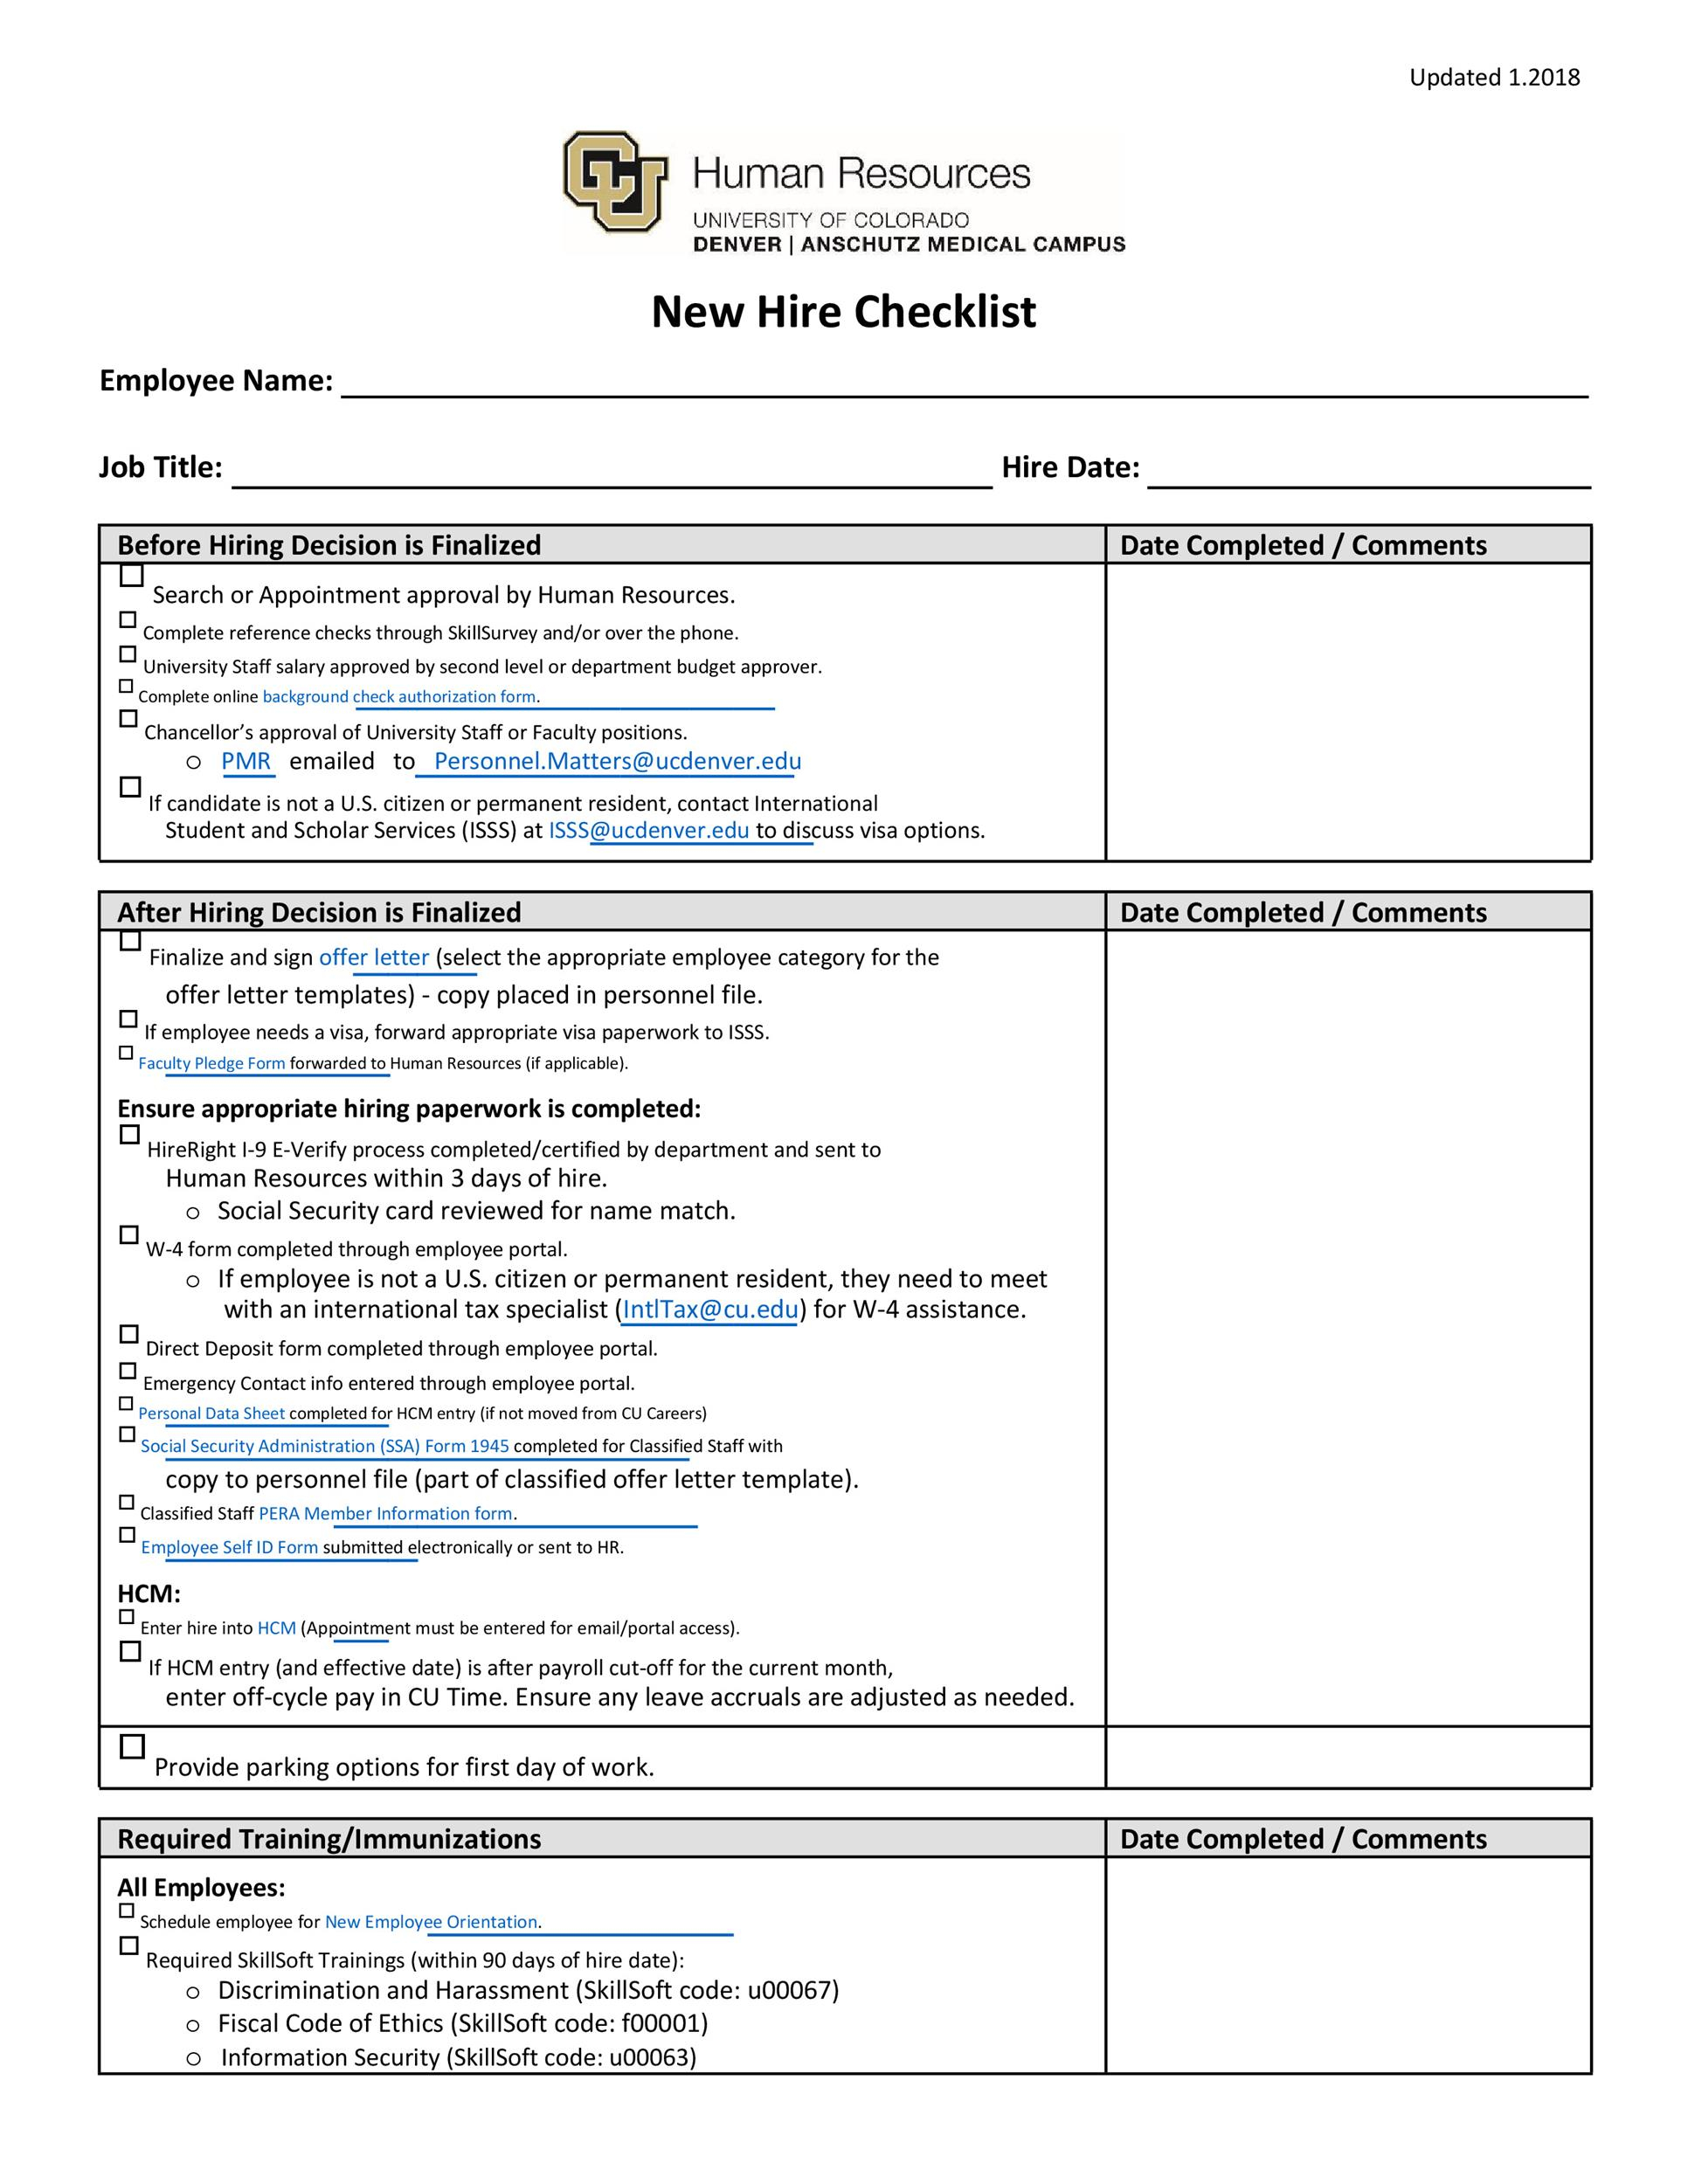 10 Useful New Hire Checklist Templates & Forms ᐅ TemplateLab Within It New Hire Checklist Template Within It New Hire Checklist Template